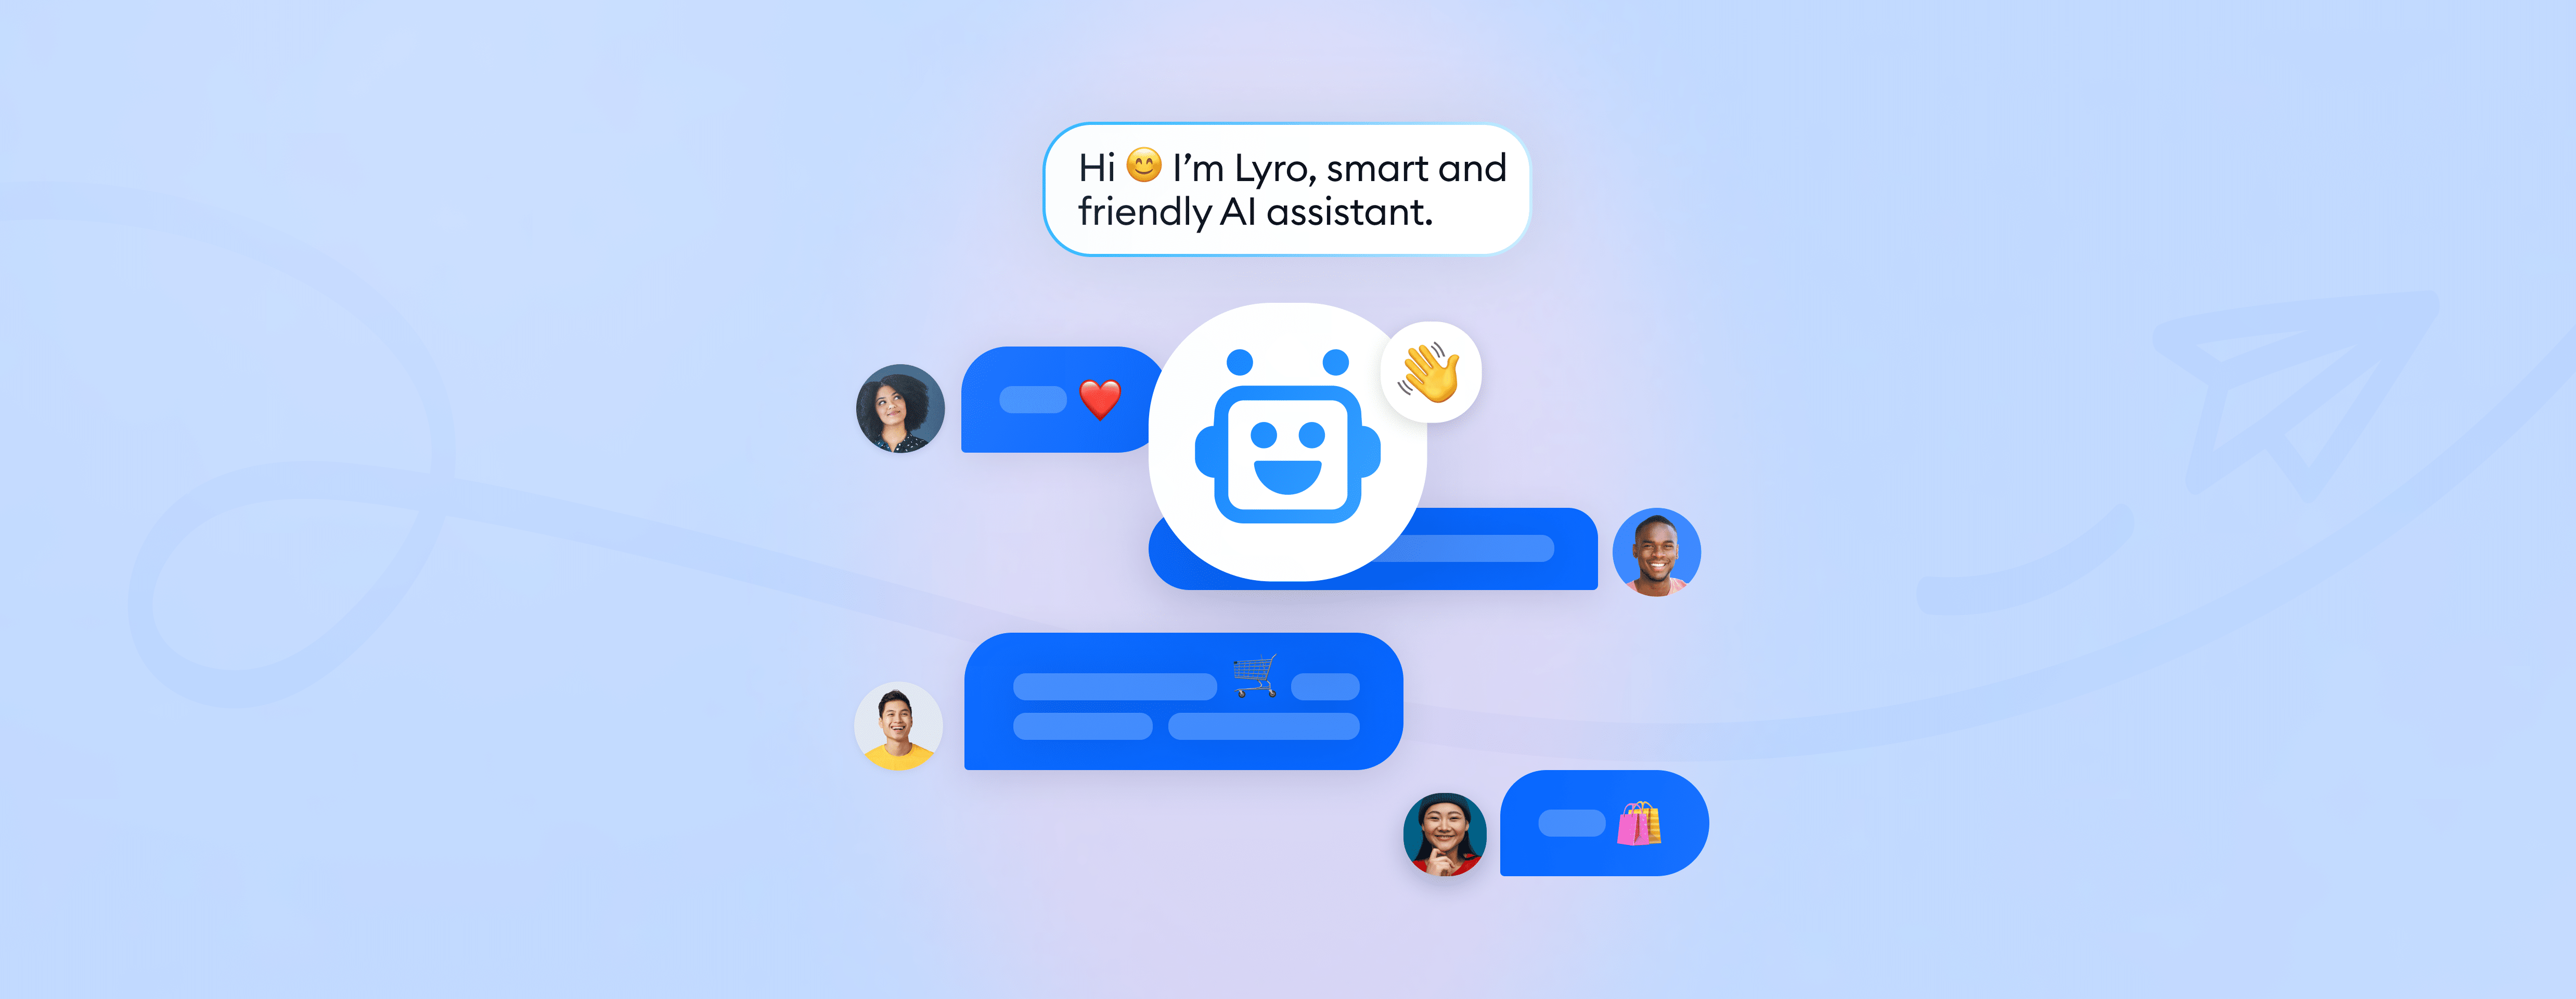 Meet Lyro: The First Conversational AI for SMBs